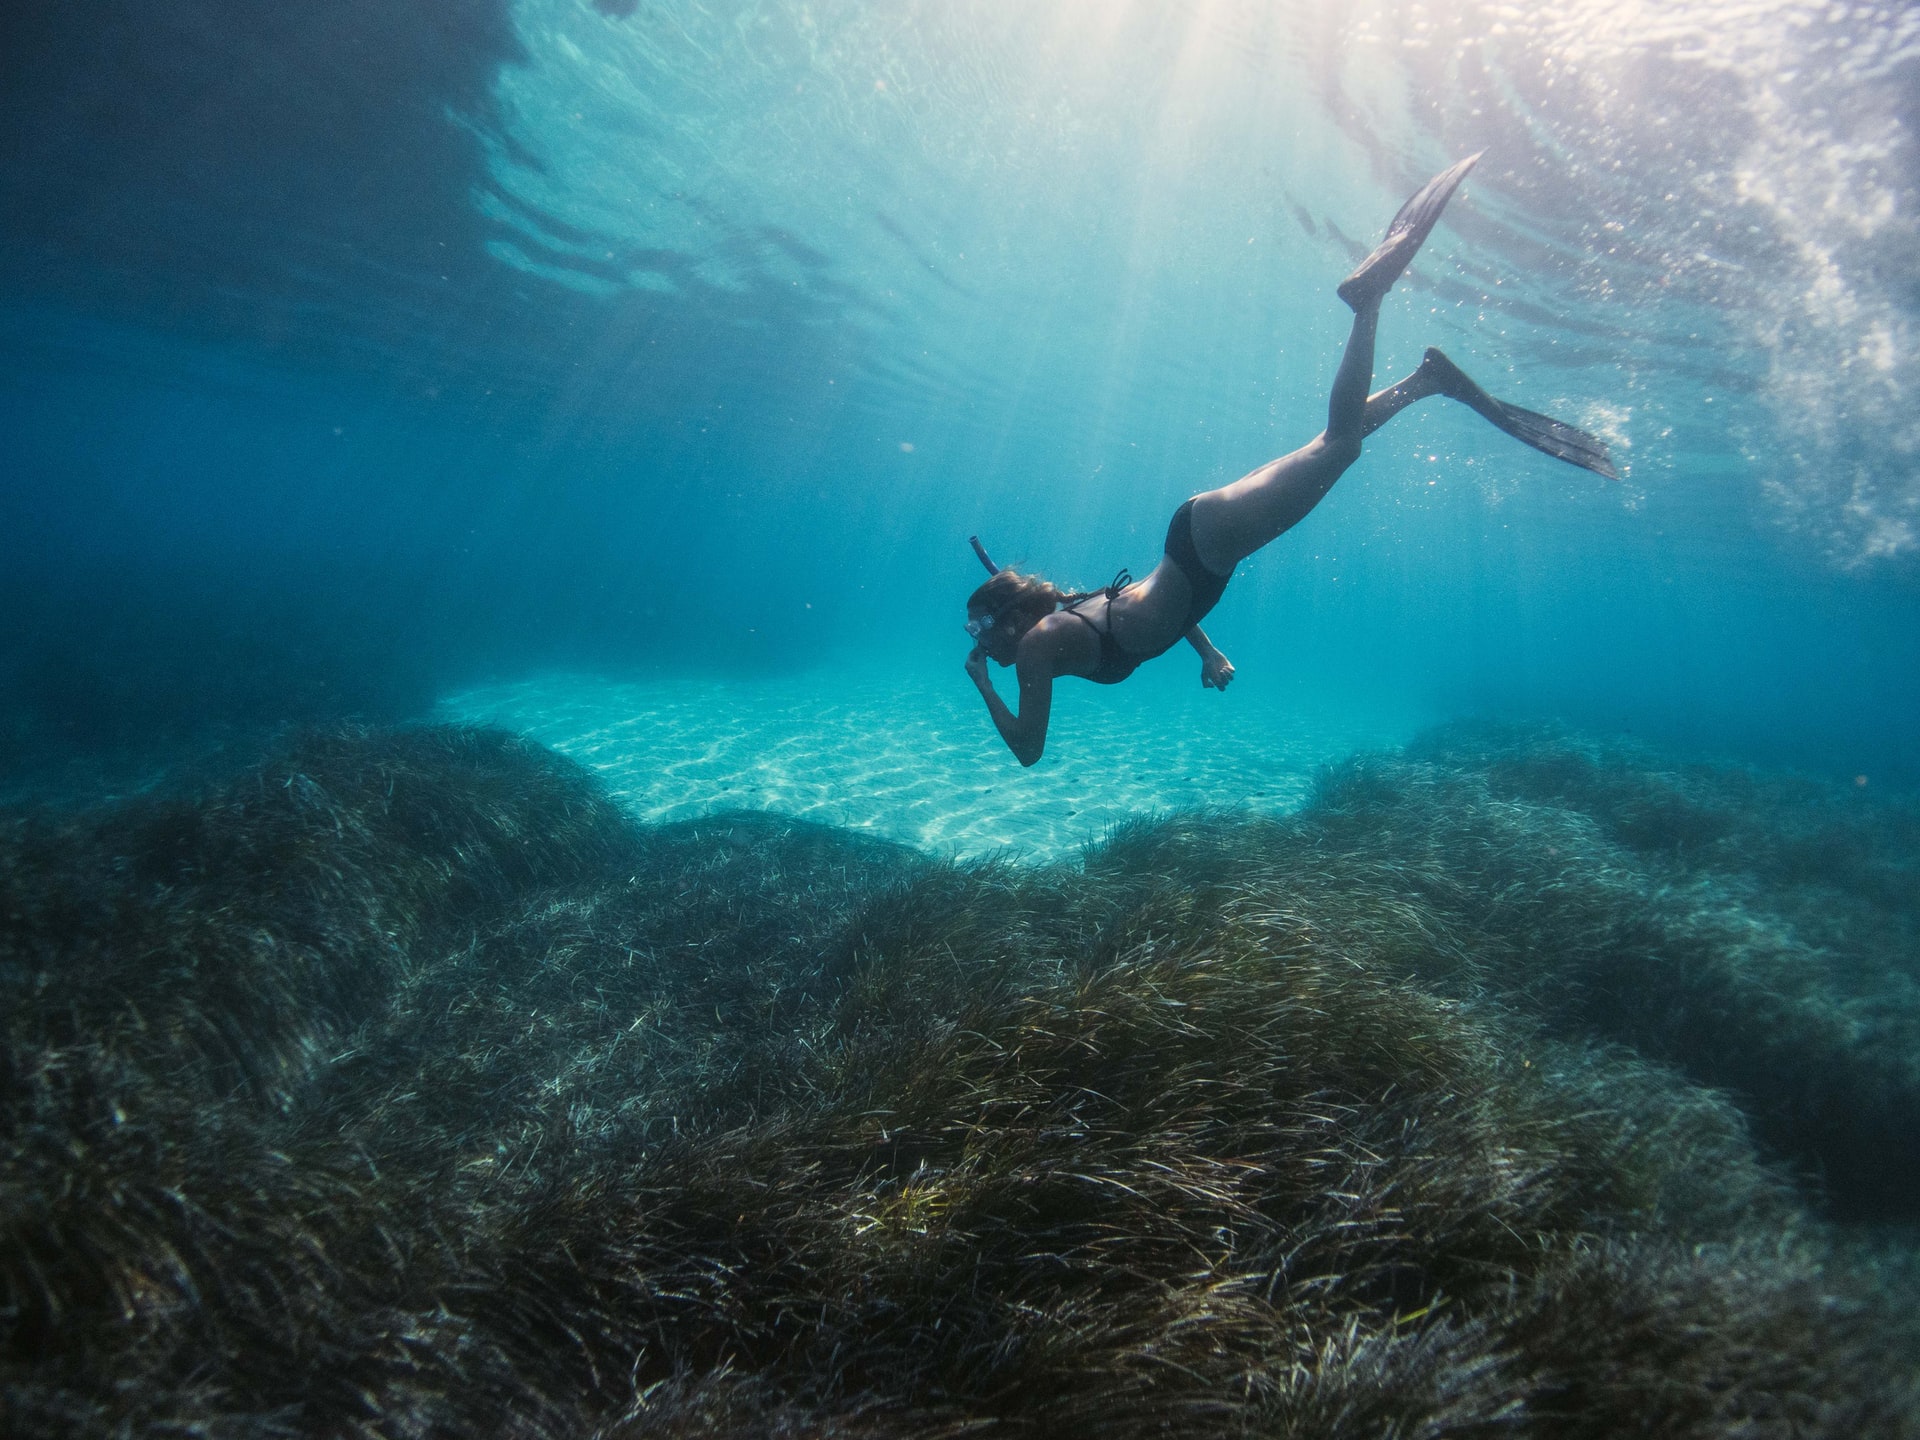 Why Does Snorkeling Make Me Nauseous? (11 Causes & Remedies)